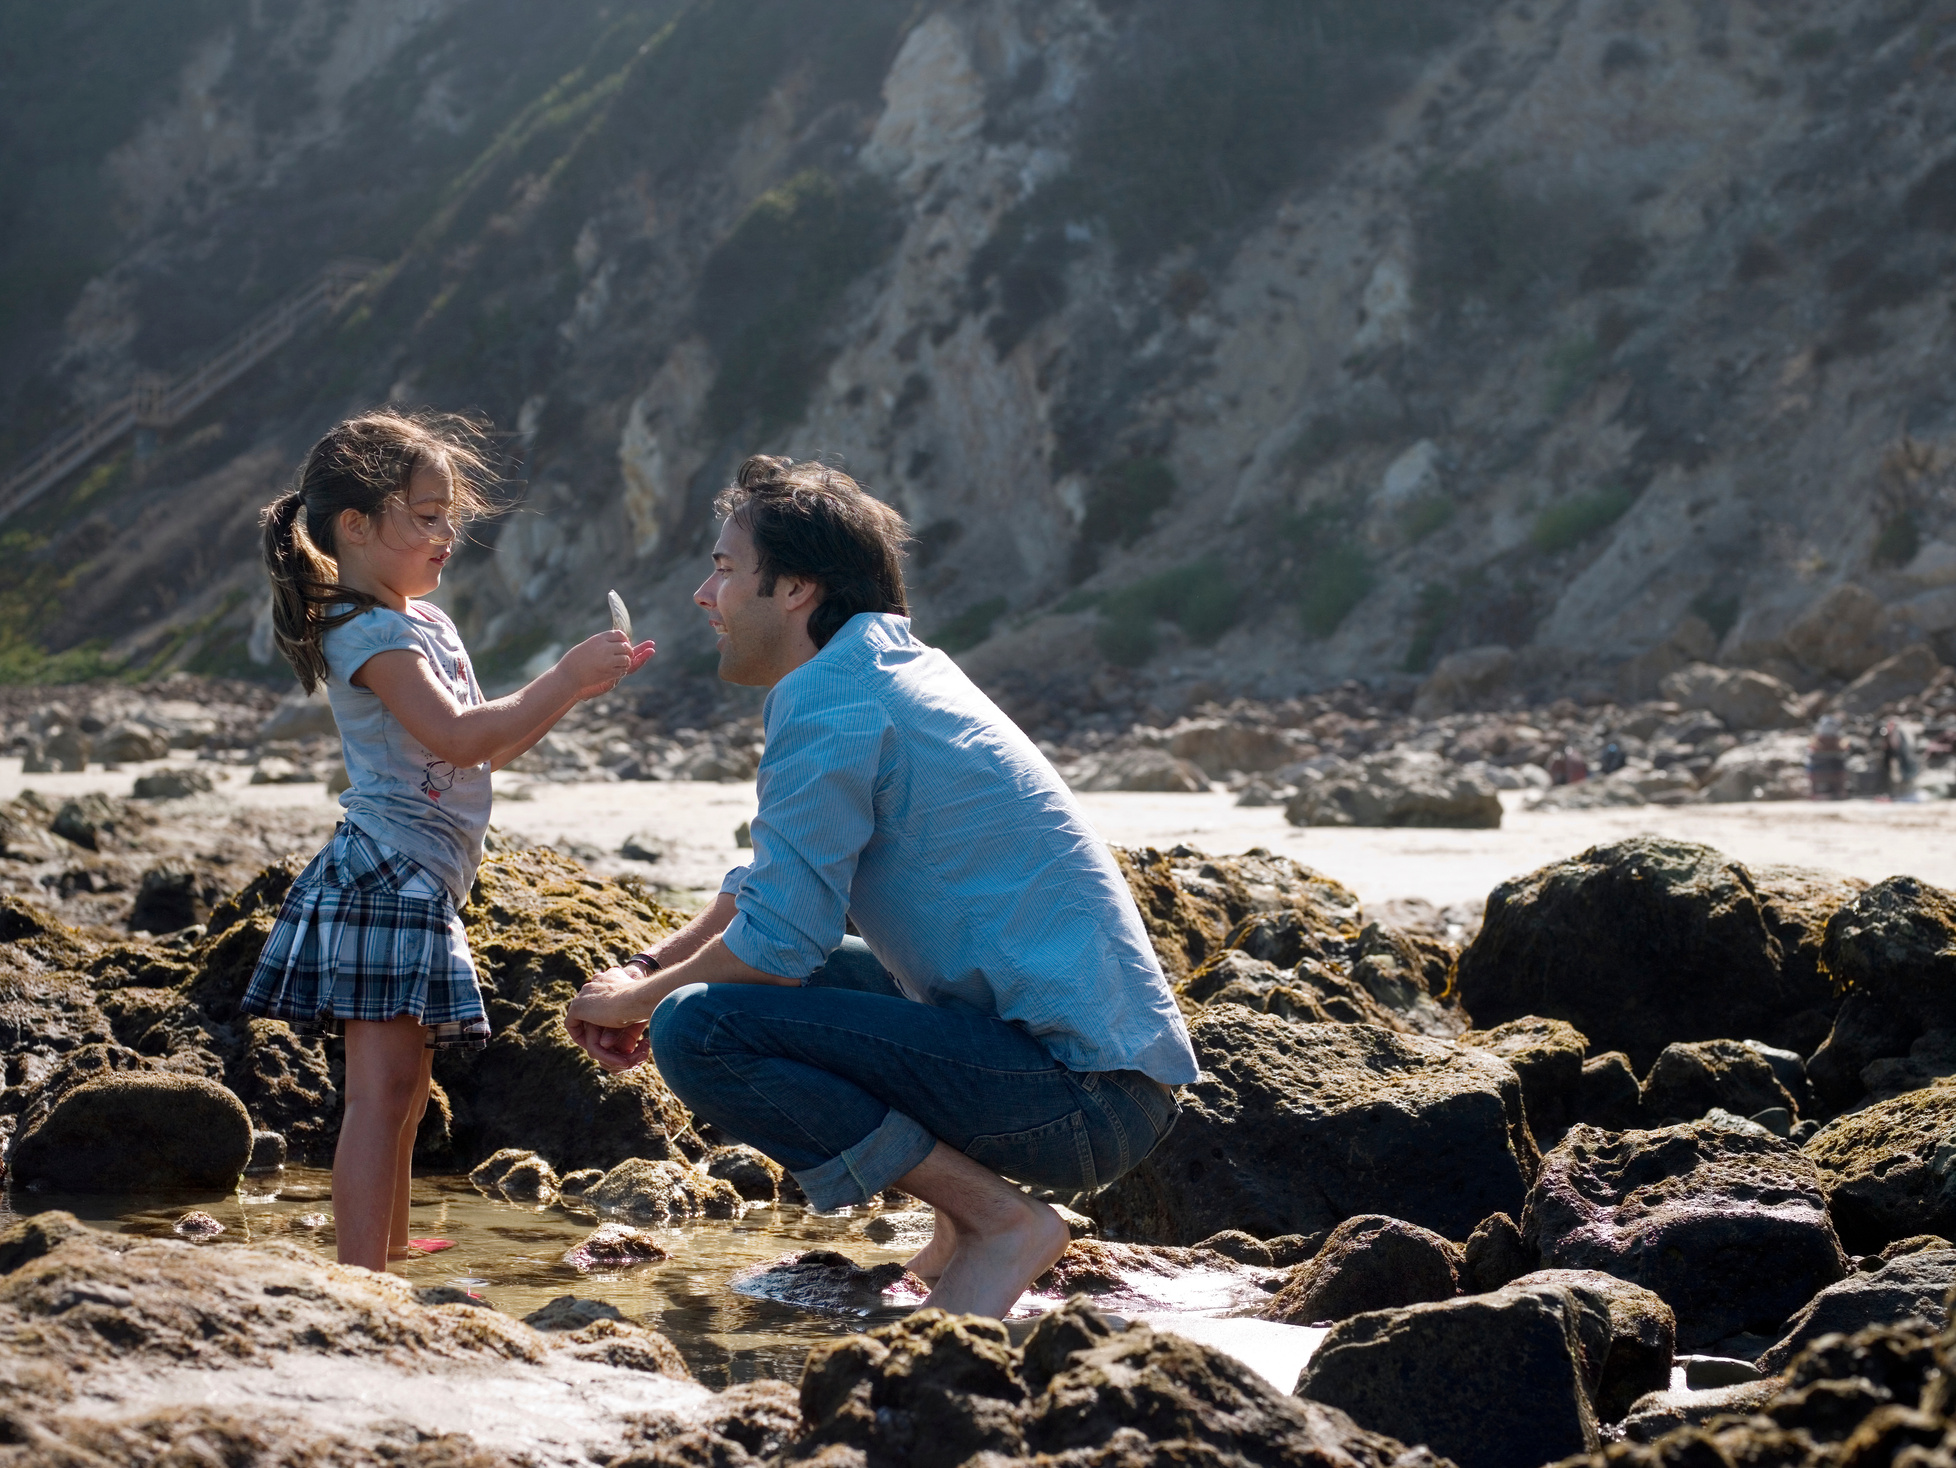 A young child shows their parent a seashell on the beach.